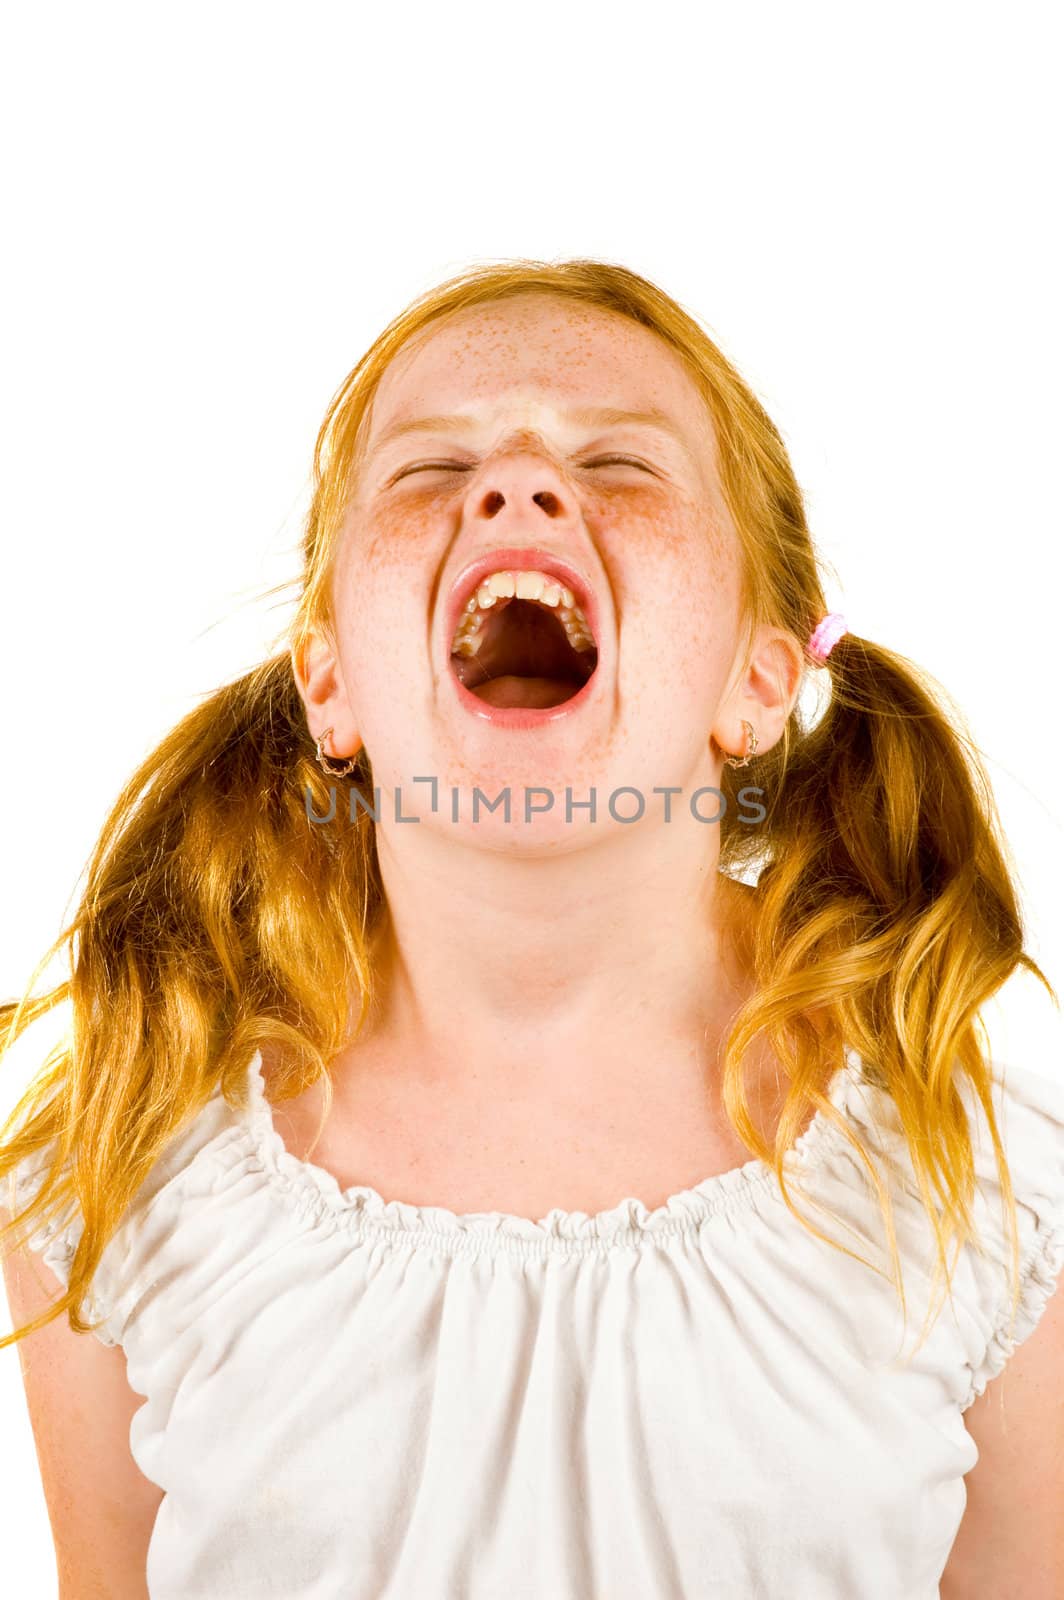 Image of young girl screaming on a white background by ladyminnie